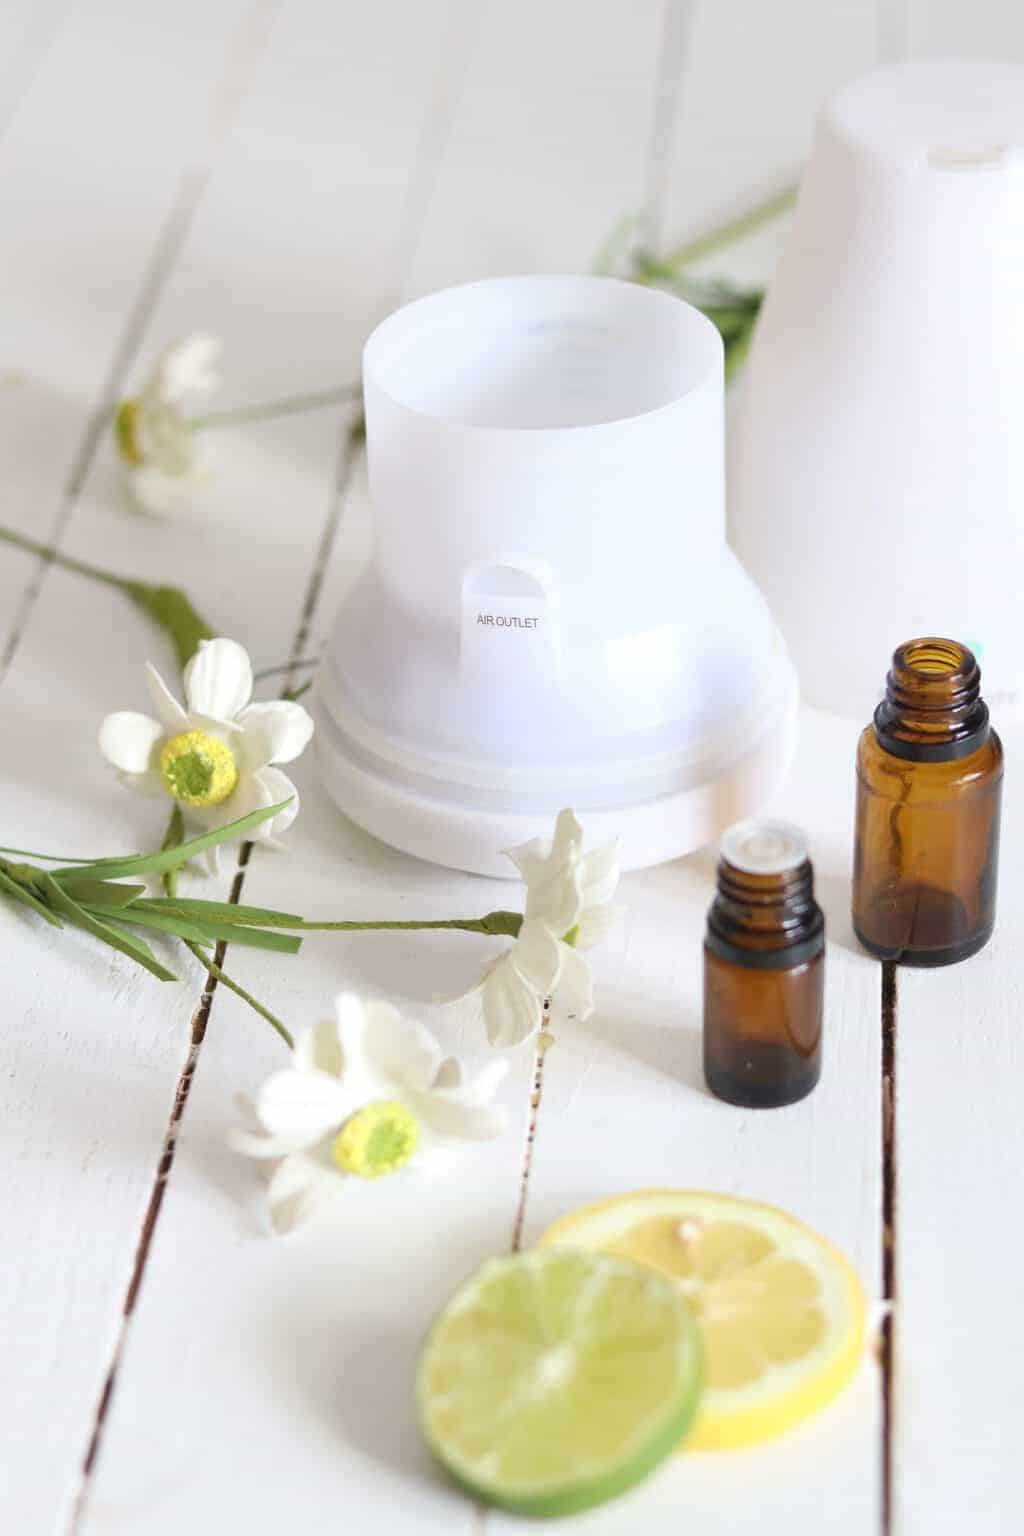 Essential oil diffuser with amber oil bottles and flowers on white shiplap.